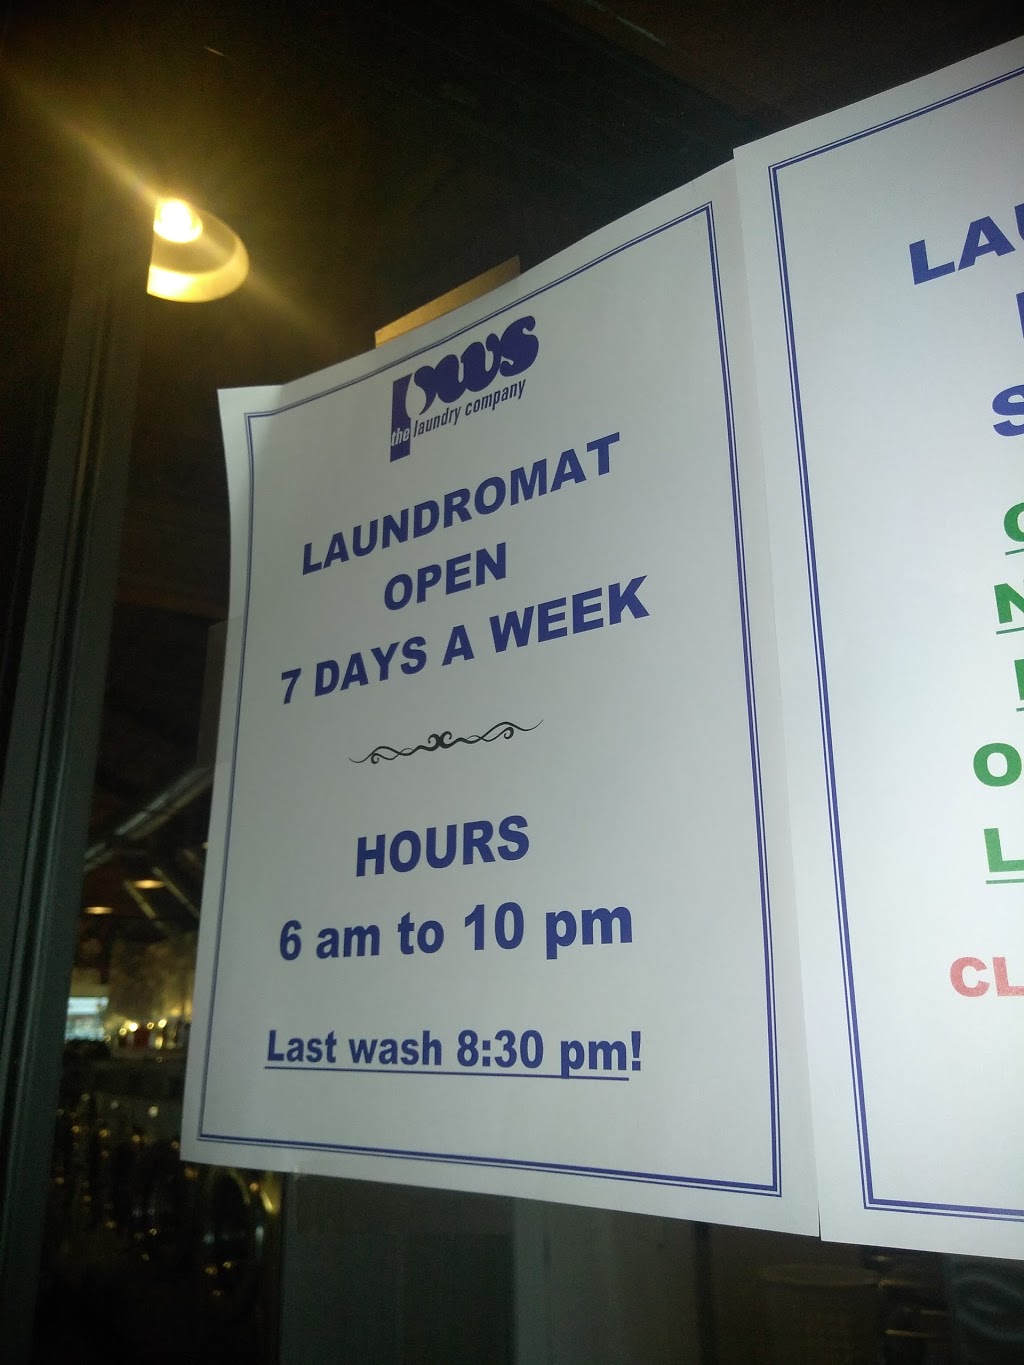 SpinCycle Laundry Lounge | 12010 Garfield Ave, South Gate, CA 90280, USA | Phone: (562) 295-2019